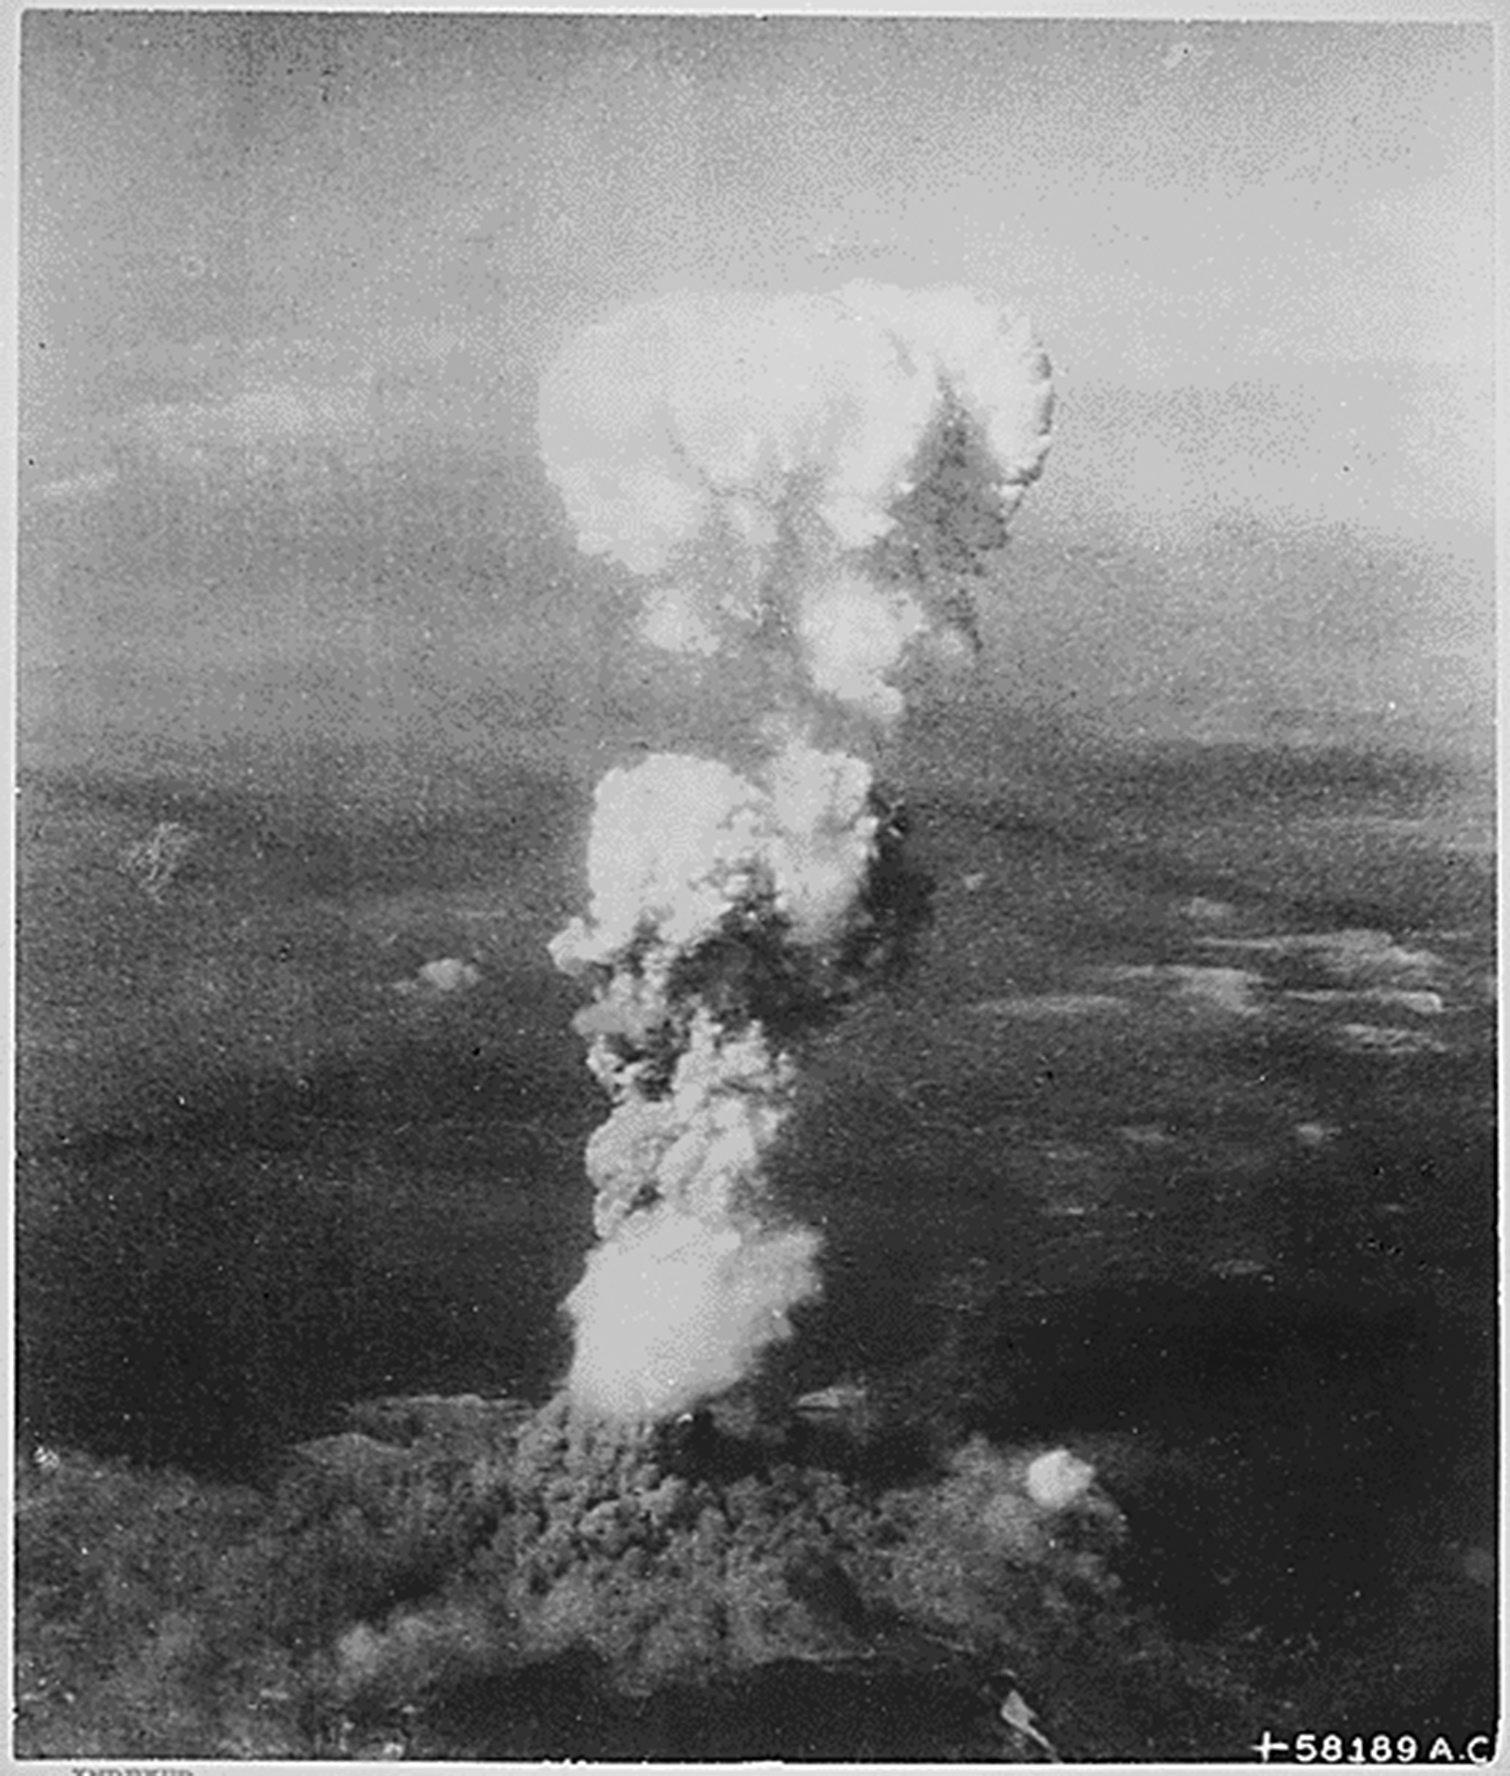 epa04867702 A handout image made available by the US National Archives of smoke billowing 20,000 feet above Hiroshima while smoke from the burst of the first atomic bomb had spread over 10,000 feet on the target at the base of the rising column, in Hiroshima, Japan, 06 August 1945. 06 August 2015 marks the 70th anniversary of the atomic bombing on Hiroshima. The US B-29 Superfortress bomber Enola Gay dropped an atomic bomb codenamed 'Little Boy' on Hiroshima on 06 August 1945, killing tens of thousands of people in seconds. By the end of the year, 140,000 people had died from the effects of the bomb. On 09 August 1945 a second atomic bomb was exploded over Nagasaki, killing more than 73,000 people. The 'Little Boy' was the first ever nuclear bomb dropped on a city and a crucial turn that led to Japan's surrender in WWII.  EPA/US NATIONAL ARCHIVES / HANDOUT  HANDOUT EDITORIAL USE ONLY